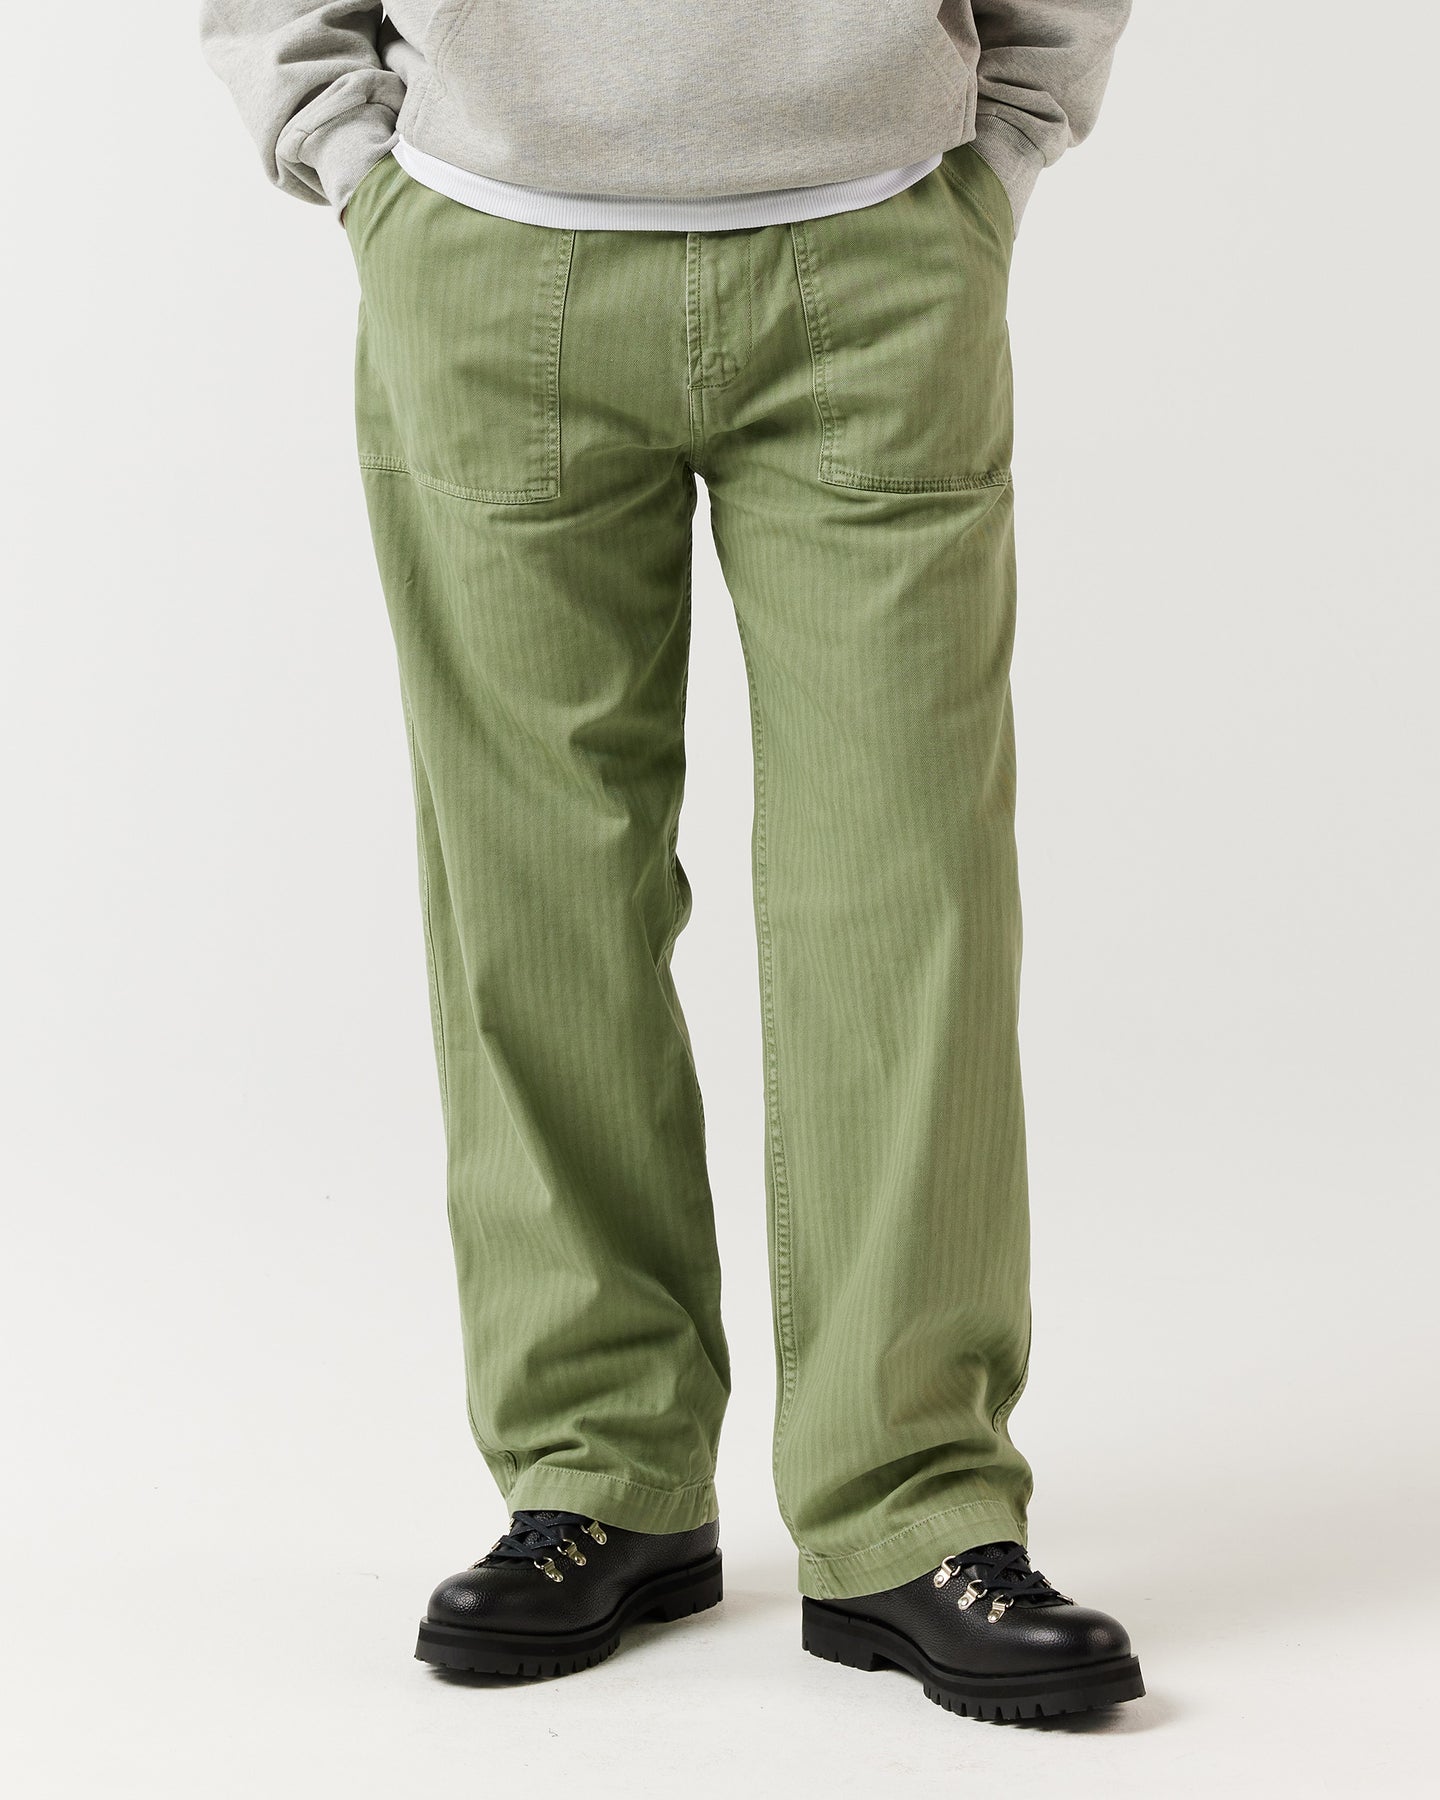 Everyday Fatigue Pant - Olive – RONNING